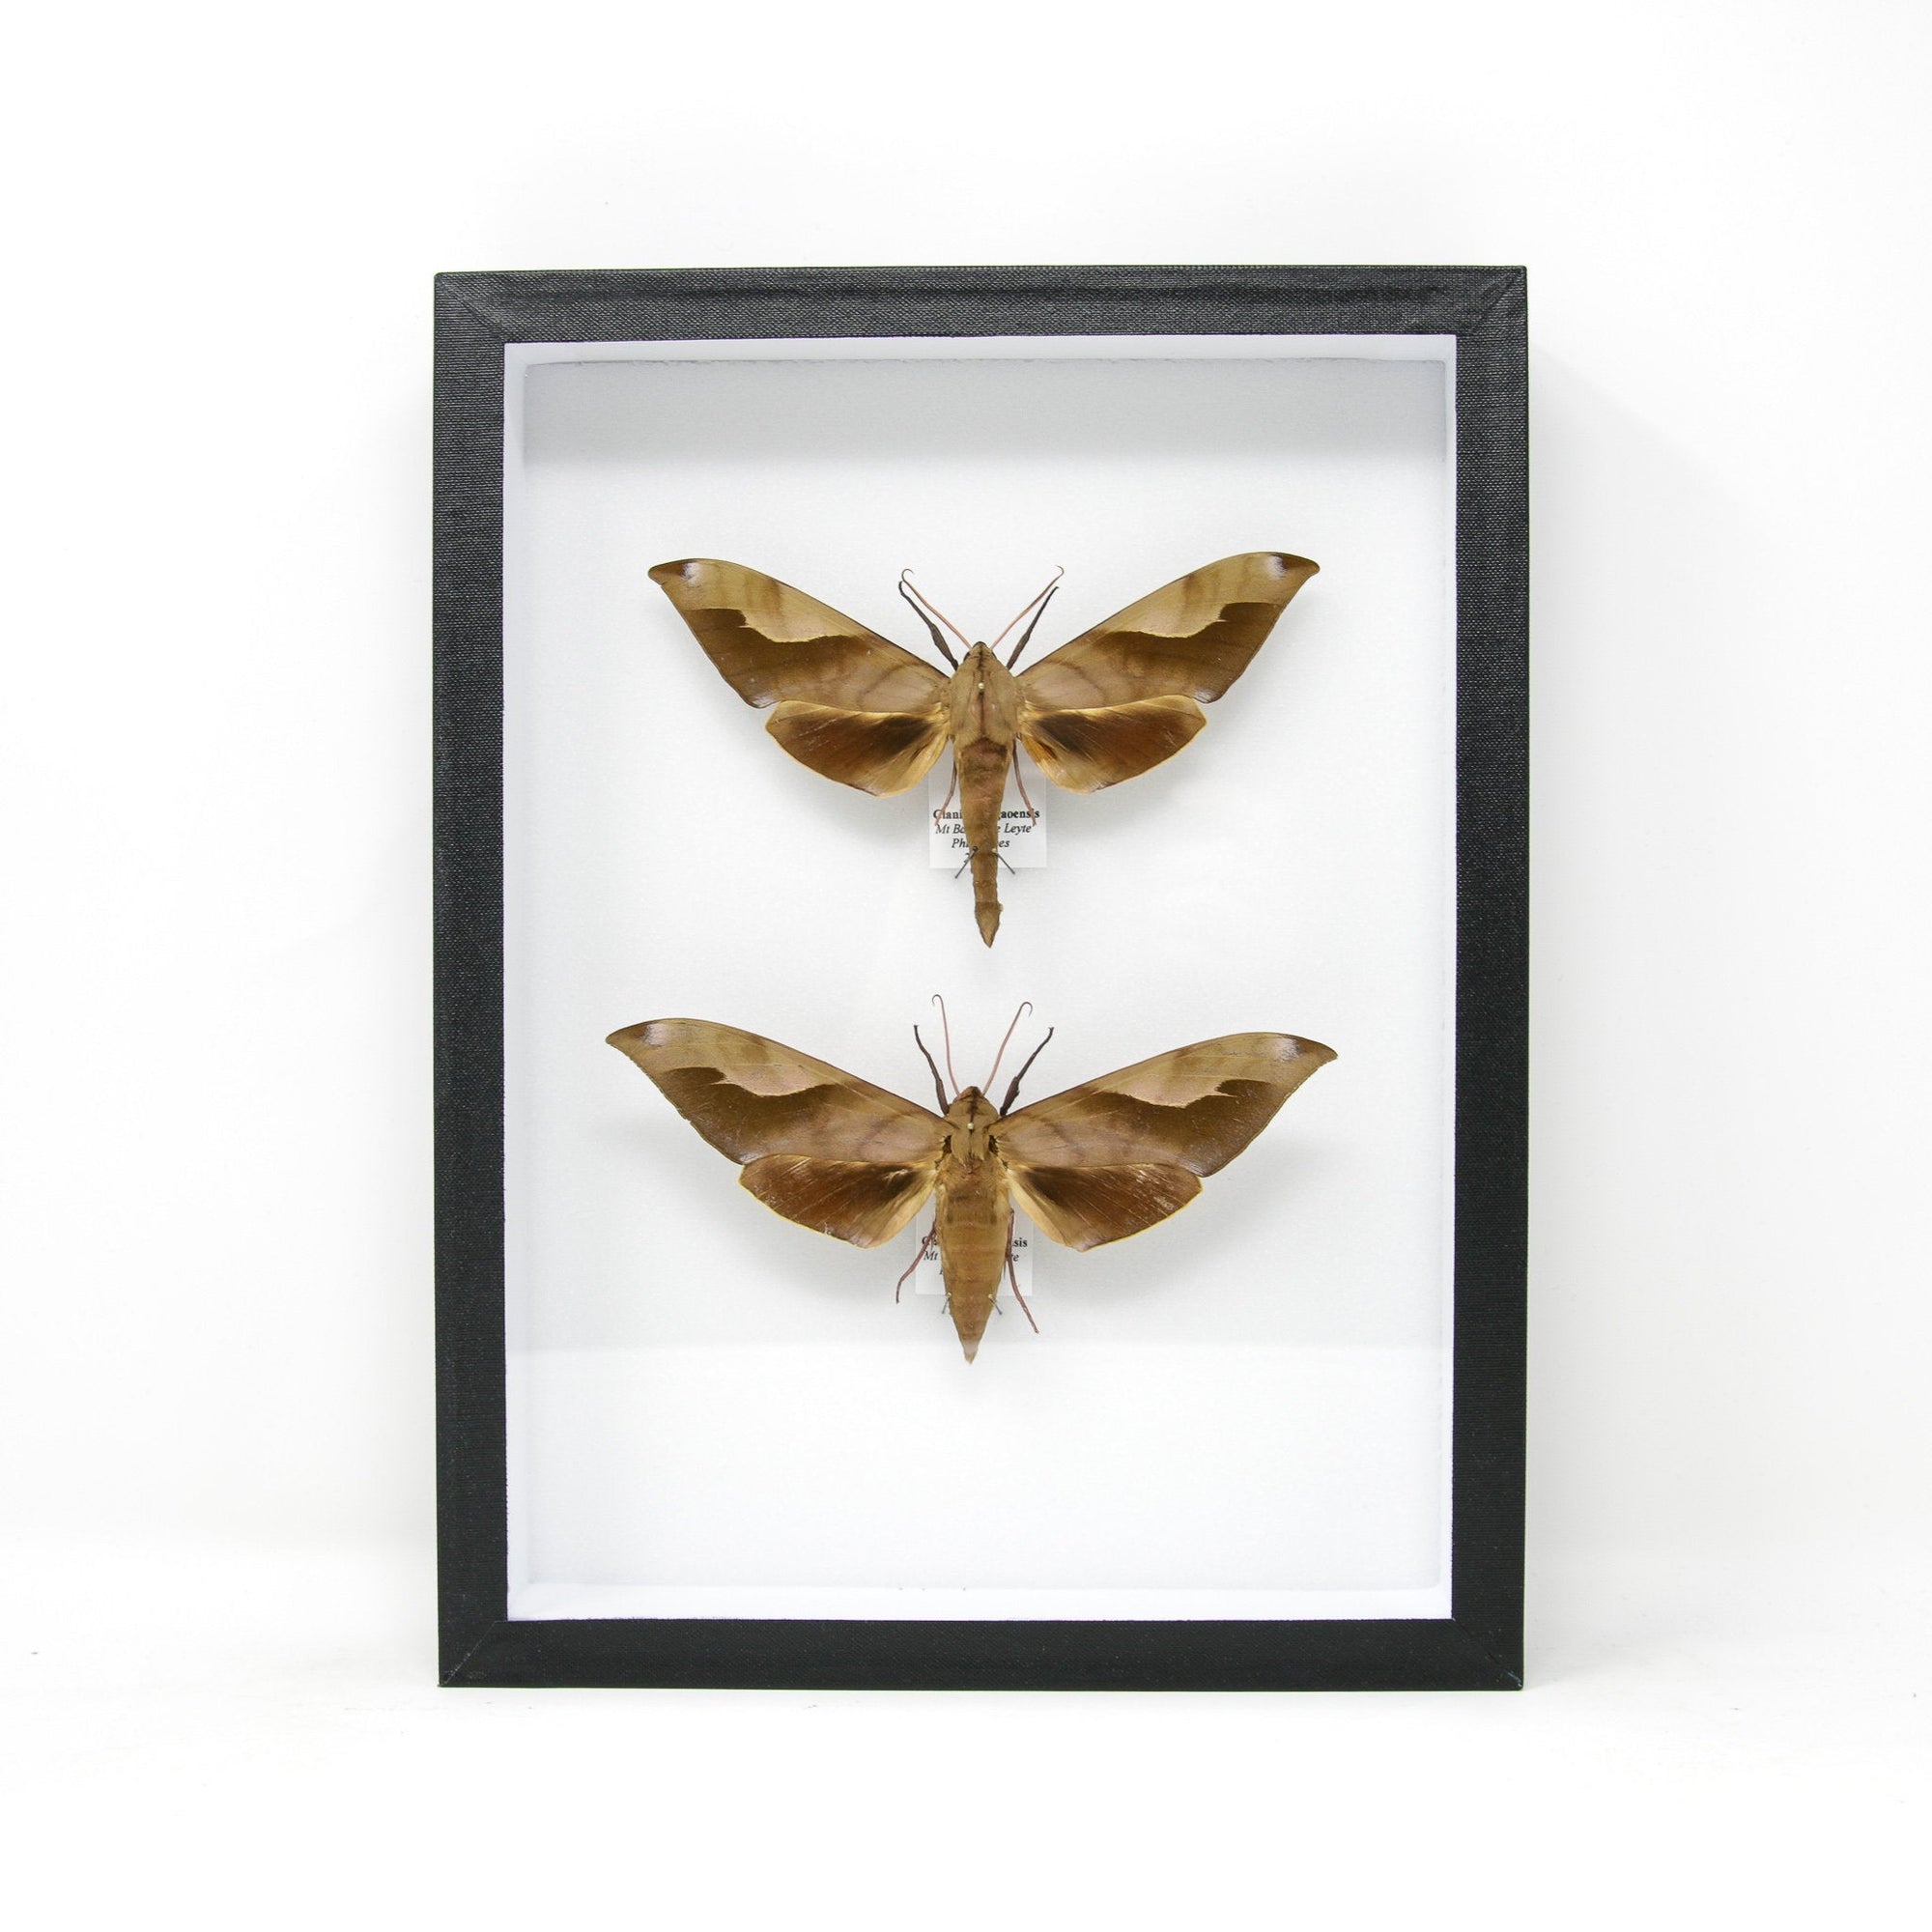 Clanis surigaoensis | Hawkmoth Pinned Specimen A1 | Mounted in Entomology Box Frame | 11.8x9x2 inch (300×230×55 mm)